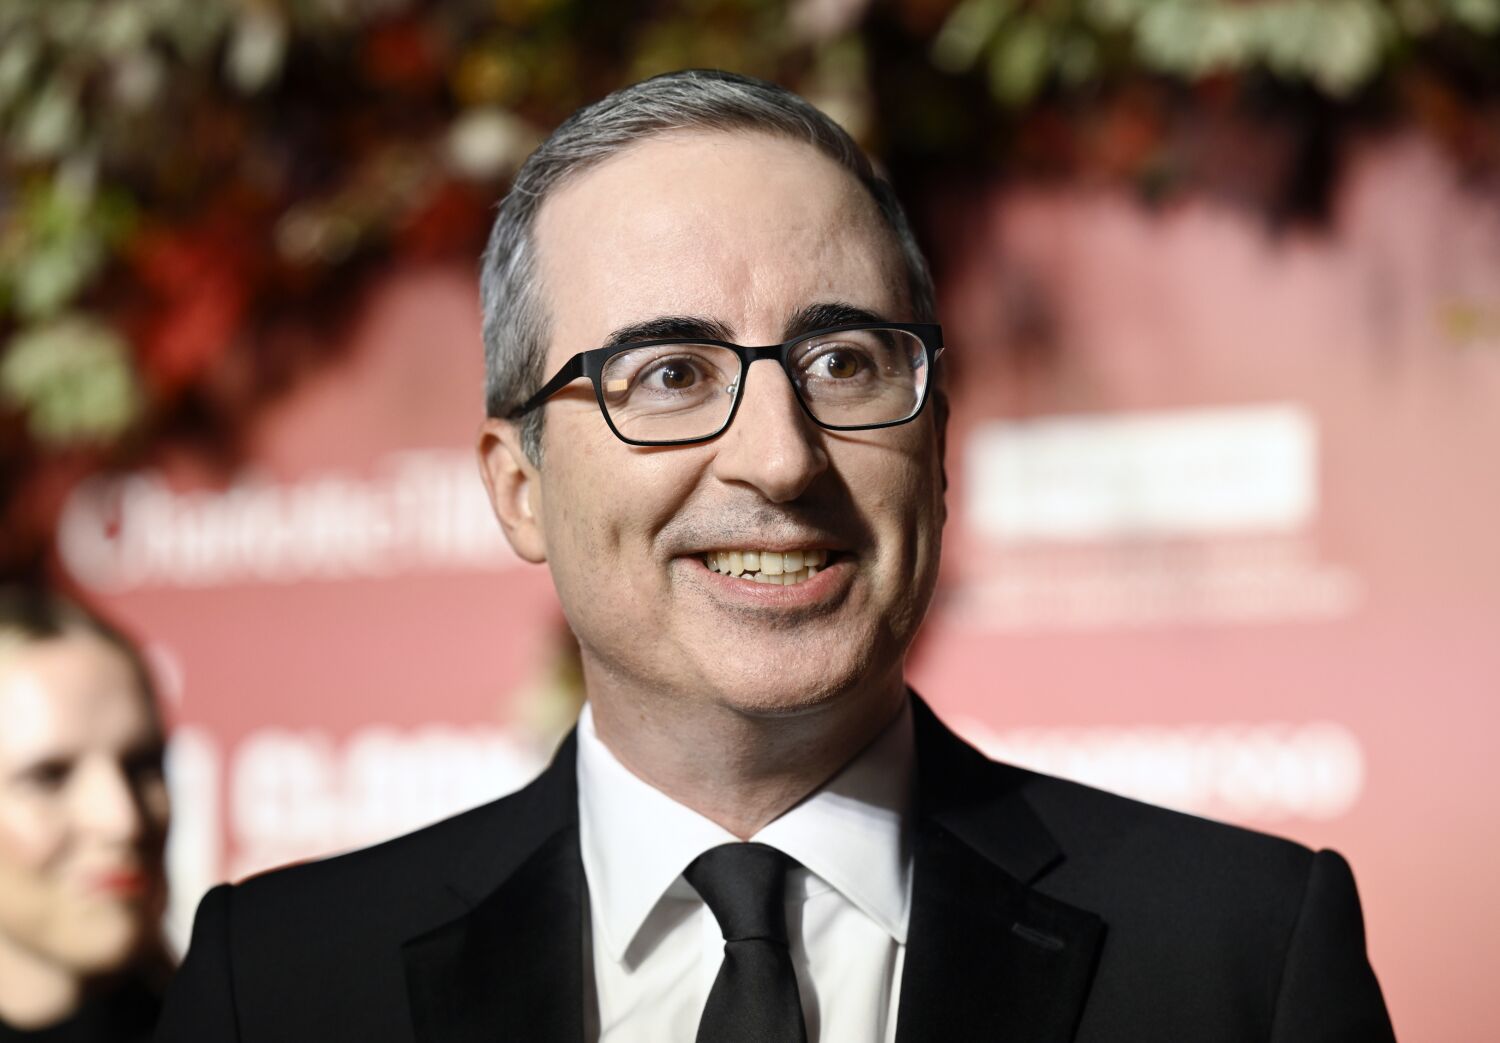 John Oliver condemns 'Meatball Ron' DeSantis as 'a petty autocrat and a bully'